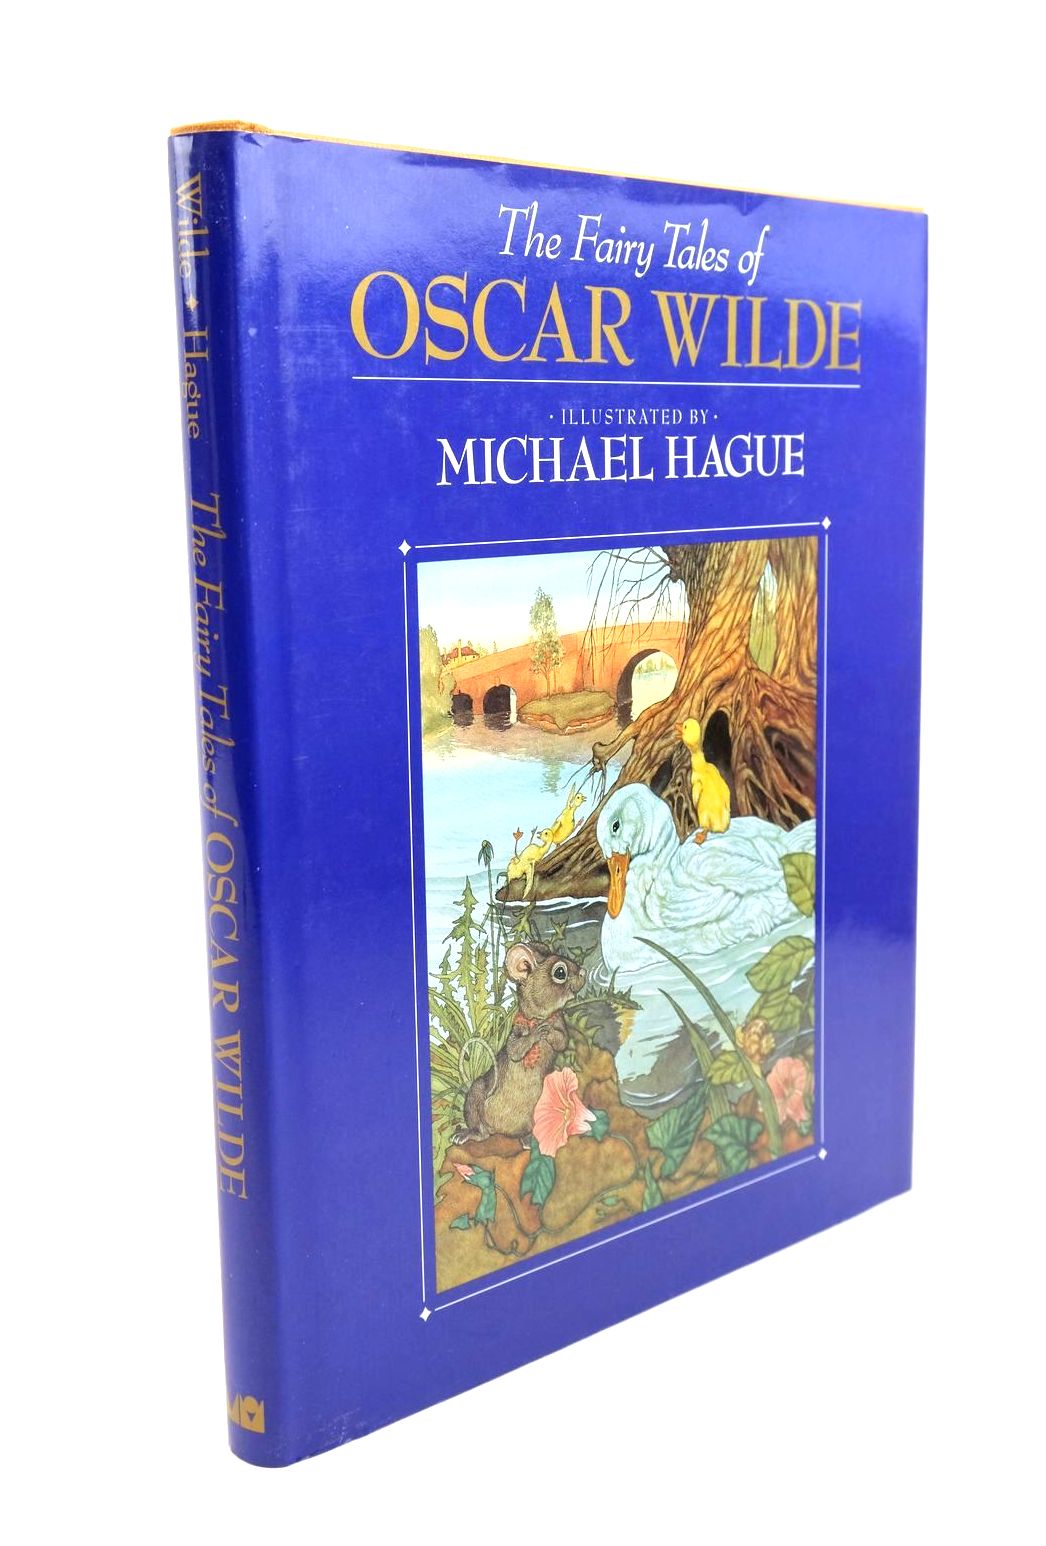 Photo of THE FAIRY TALES OF OSCAR WILDE written by Wilde, Oscar illustrated by Hague, Michael published by Michael O'Mara Books Limited (STOCK CODE: 1321472)  for sale by Stella & Rose's Books